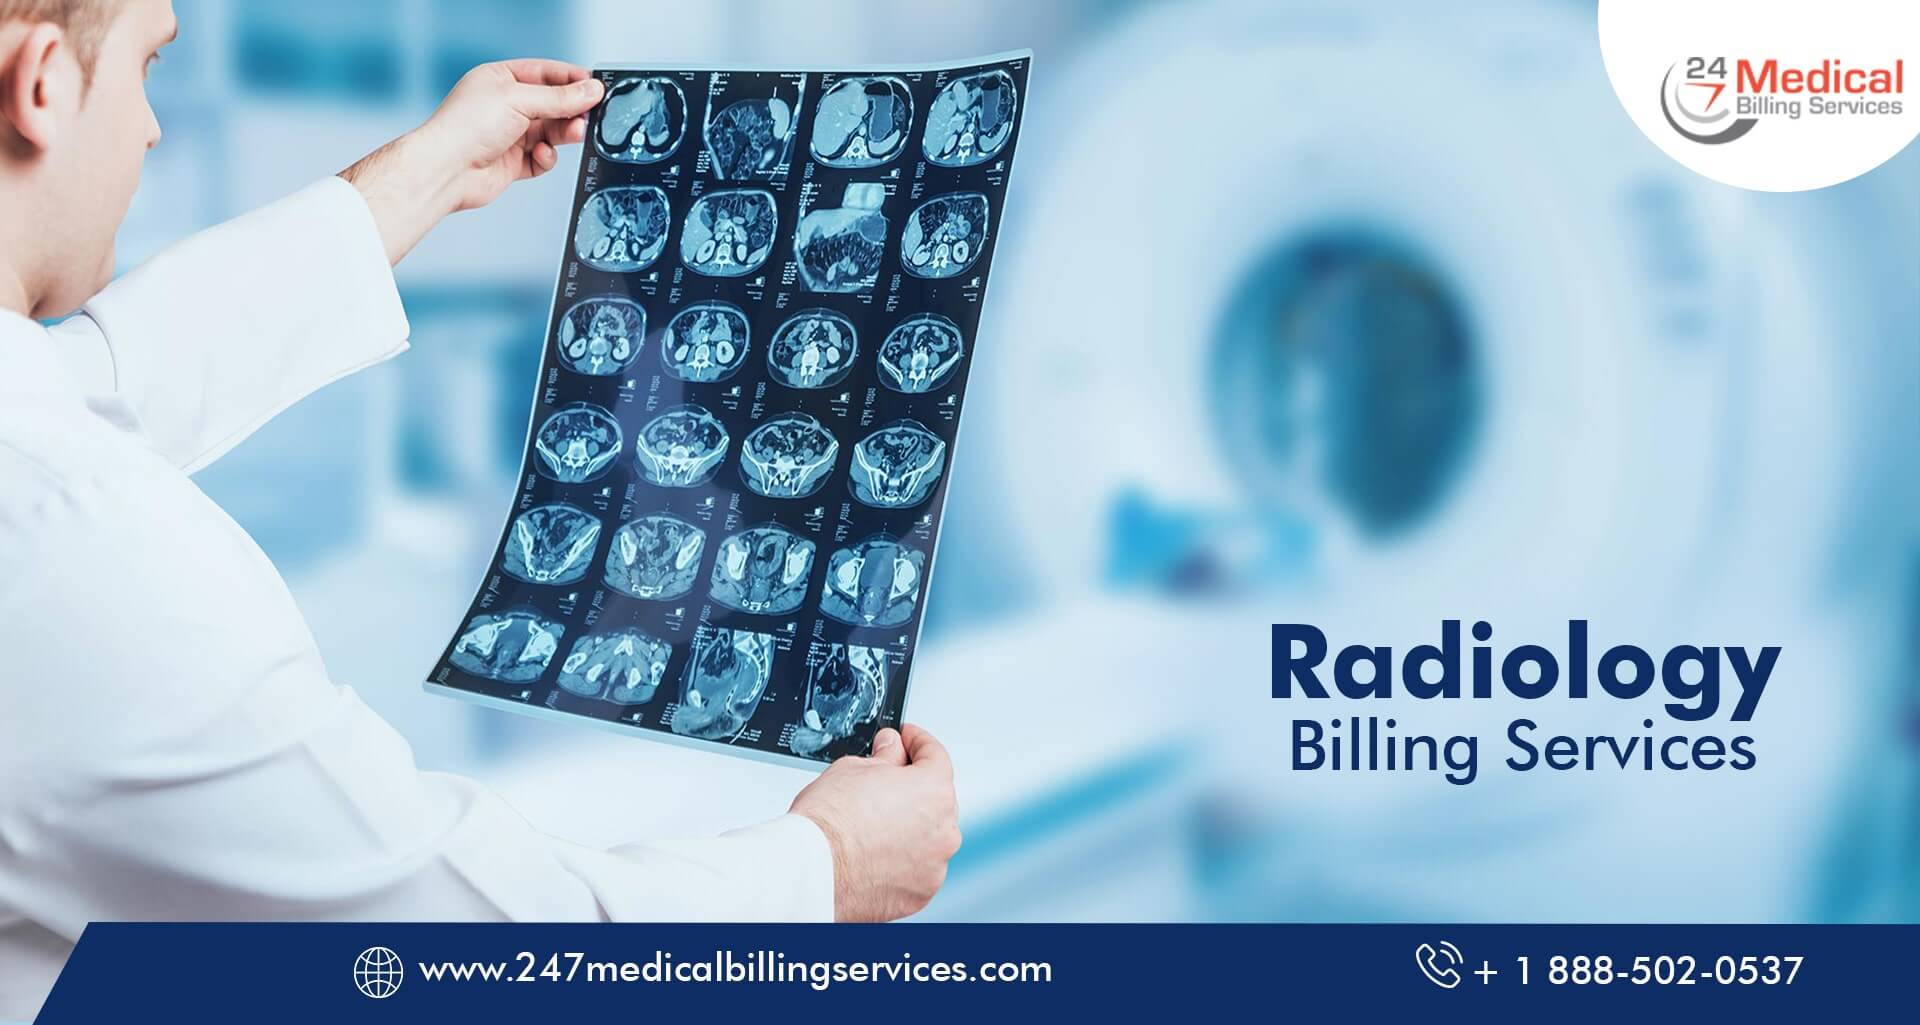  Radiology Billing Services in California (CA)